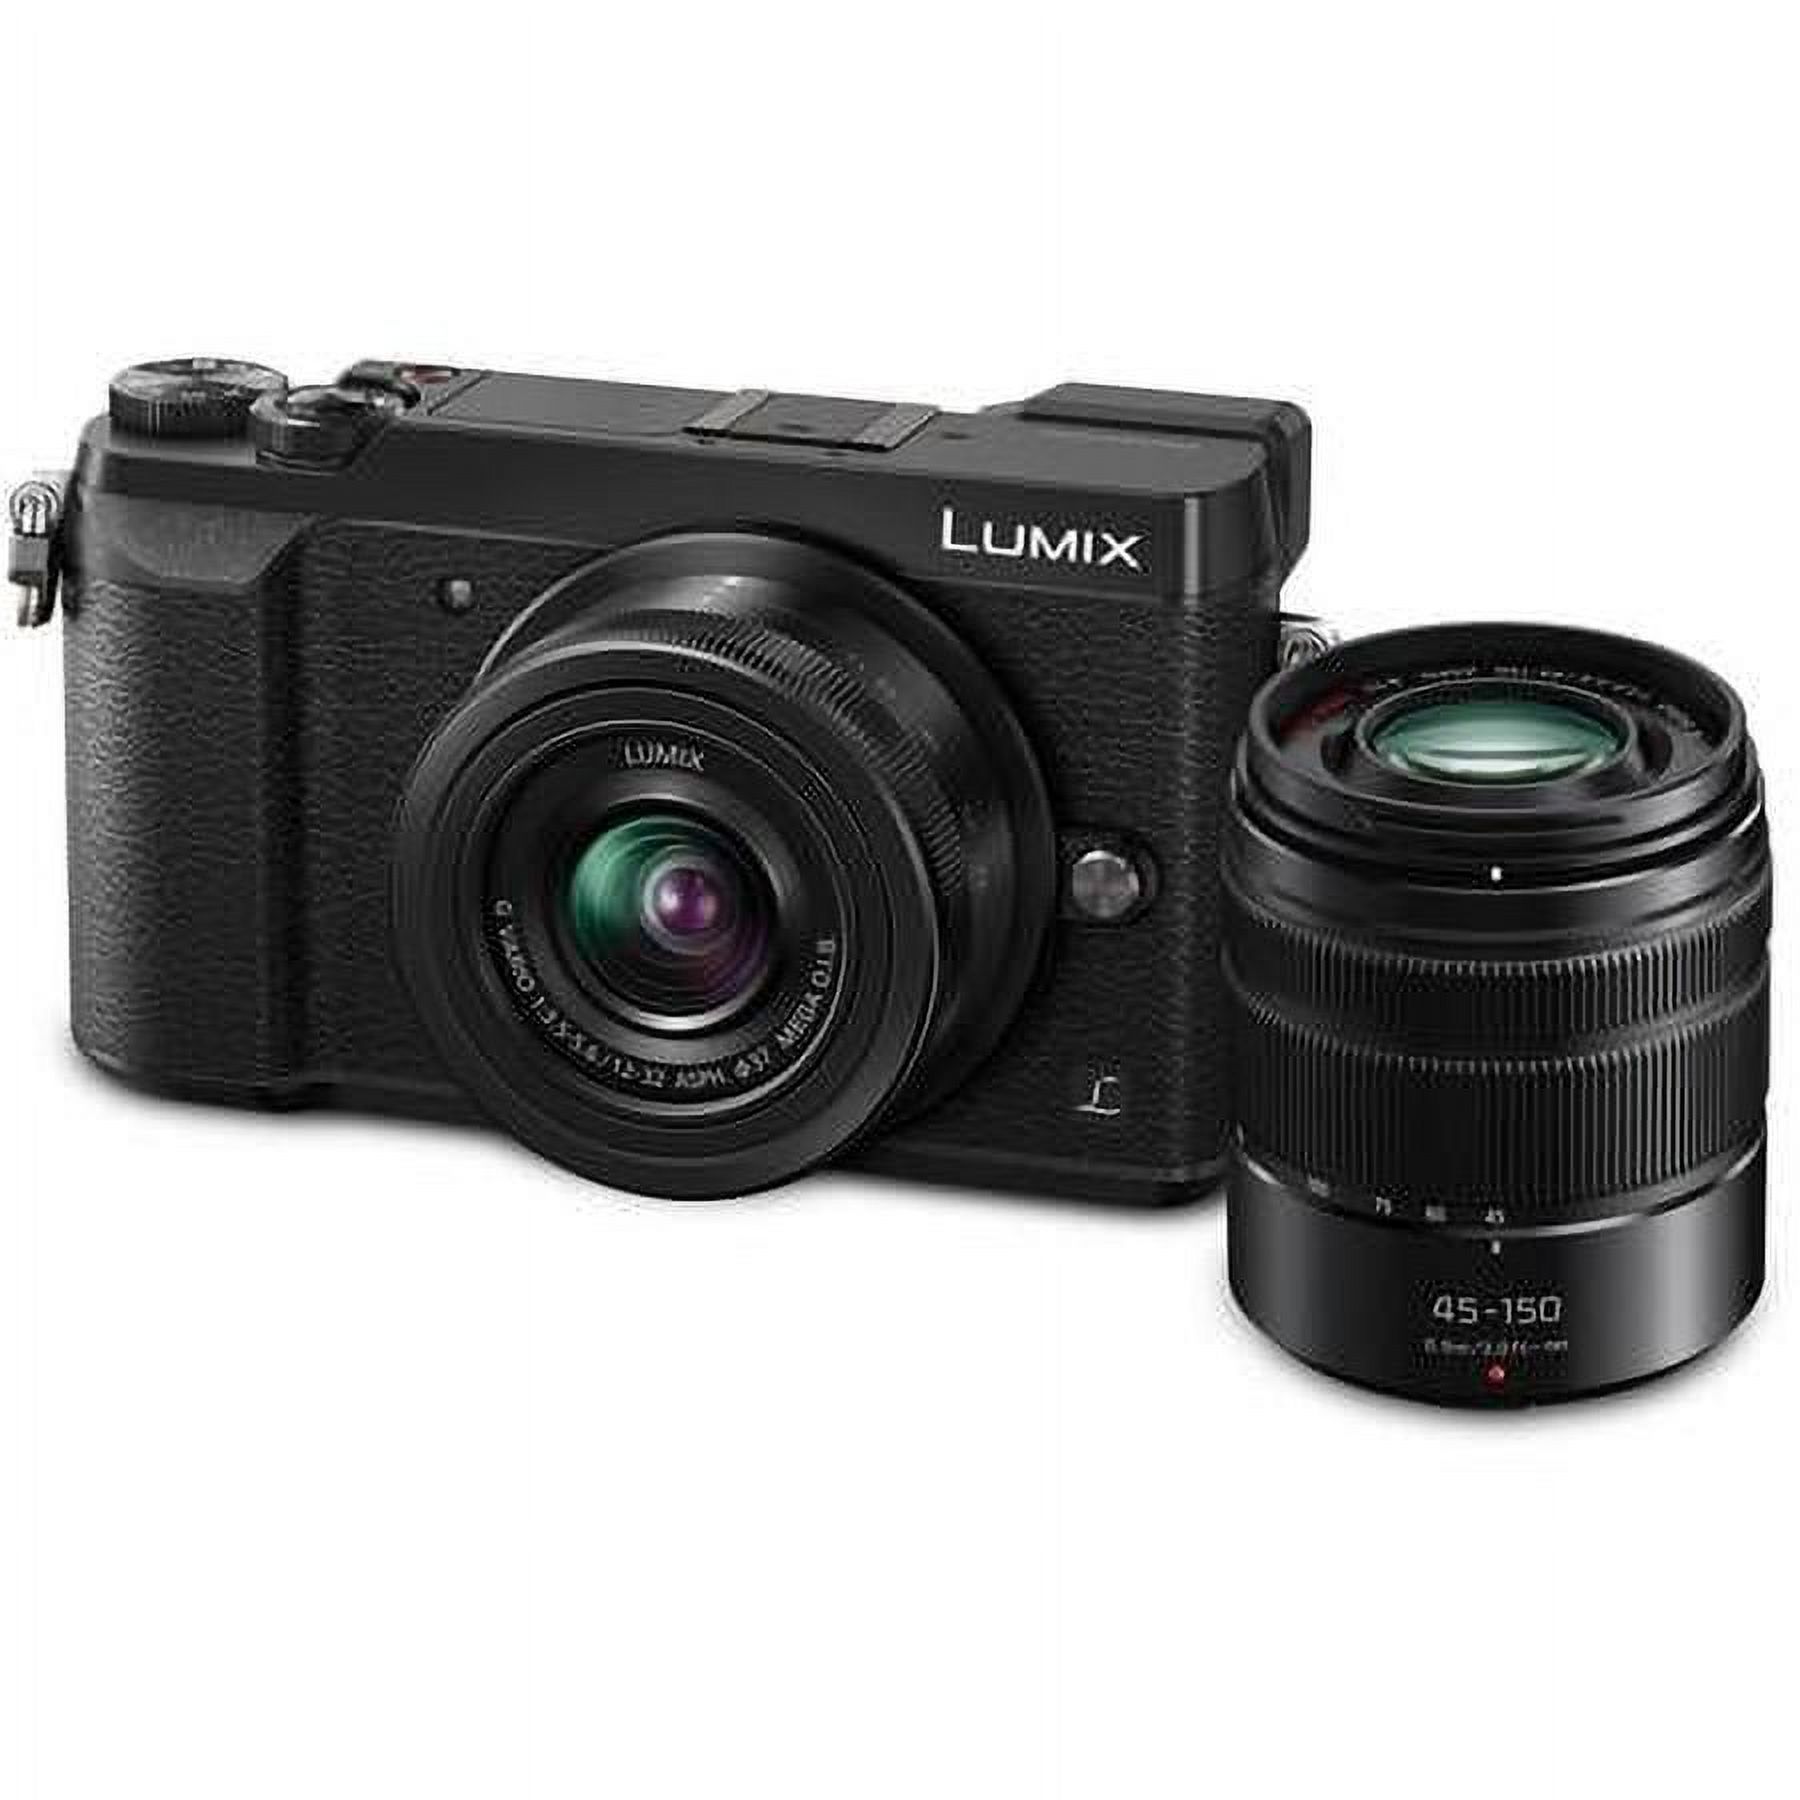 Lumix DMC-GX85 Mirrorless Camera Black with Lumix G Vario 12-32mm f/3.5-5.6 & 45-150mm F4.0-5.6 Lenses - Bundle With Camera Case, 32GB SDHC Card, 52mm Filter Kit, Mac Software, And More - image 5 of 11